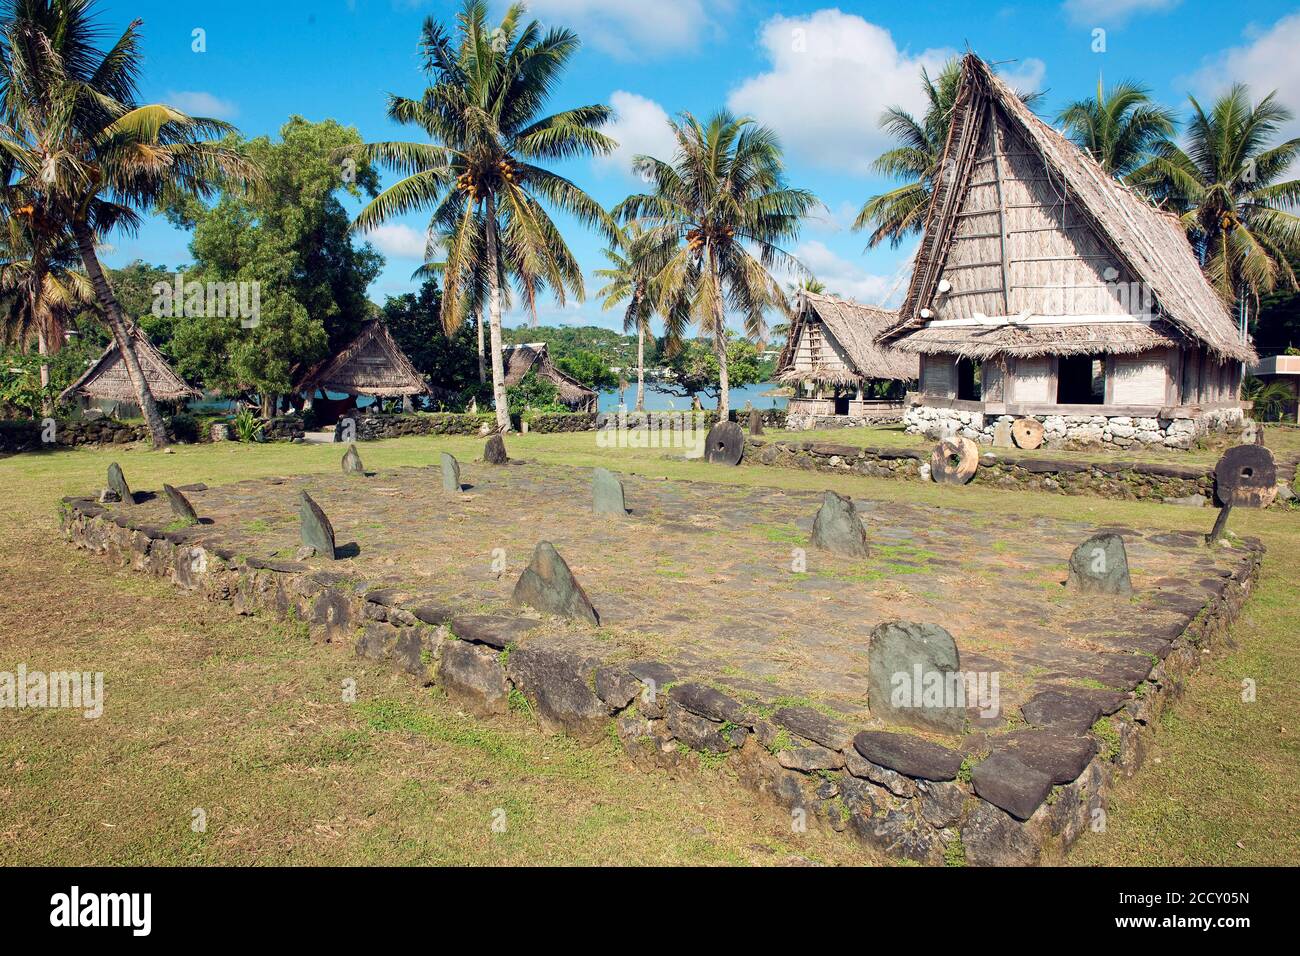 Museum village with traditional houses of the South Sea culture, Yap Island, Micronesia Stock Photo